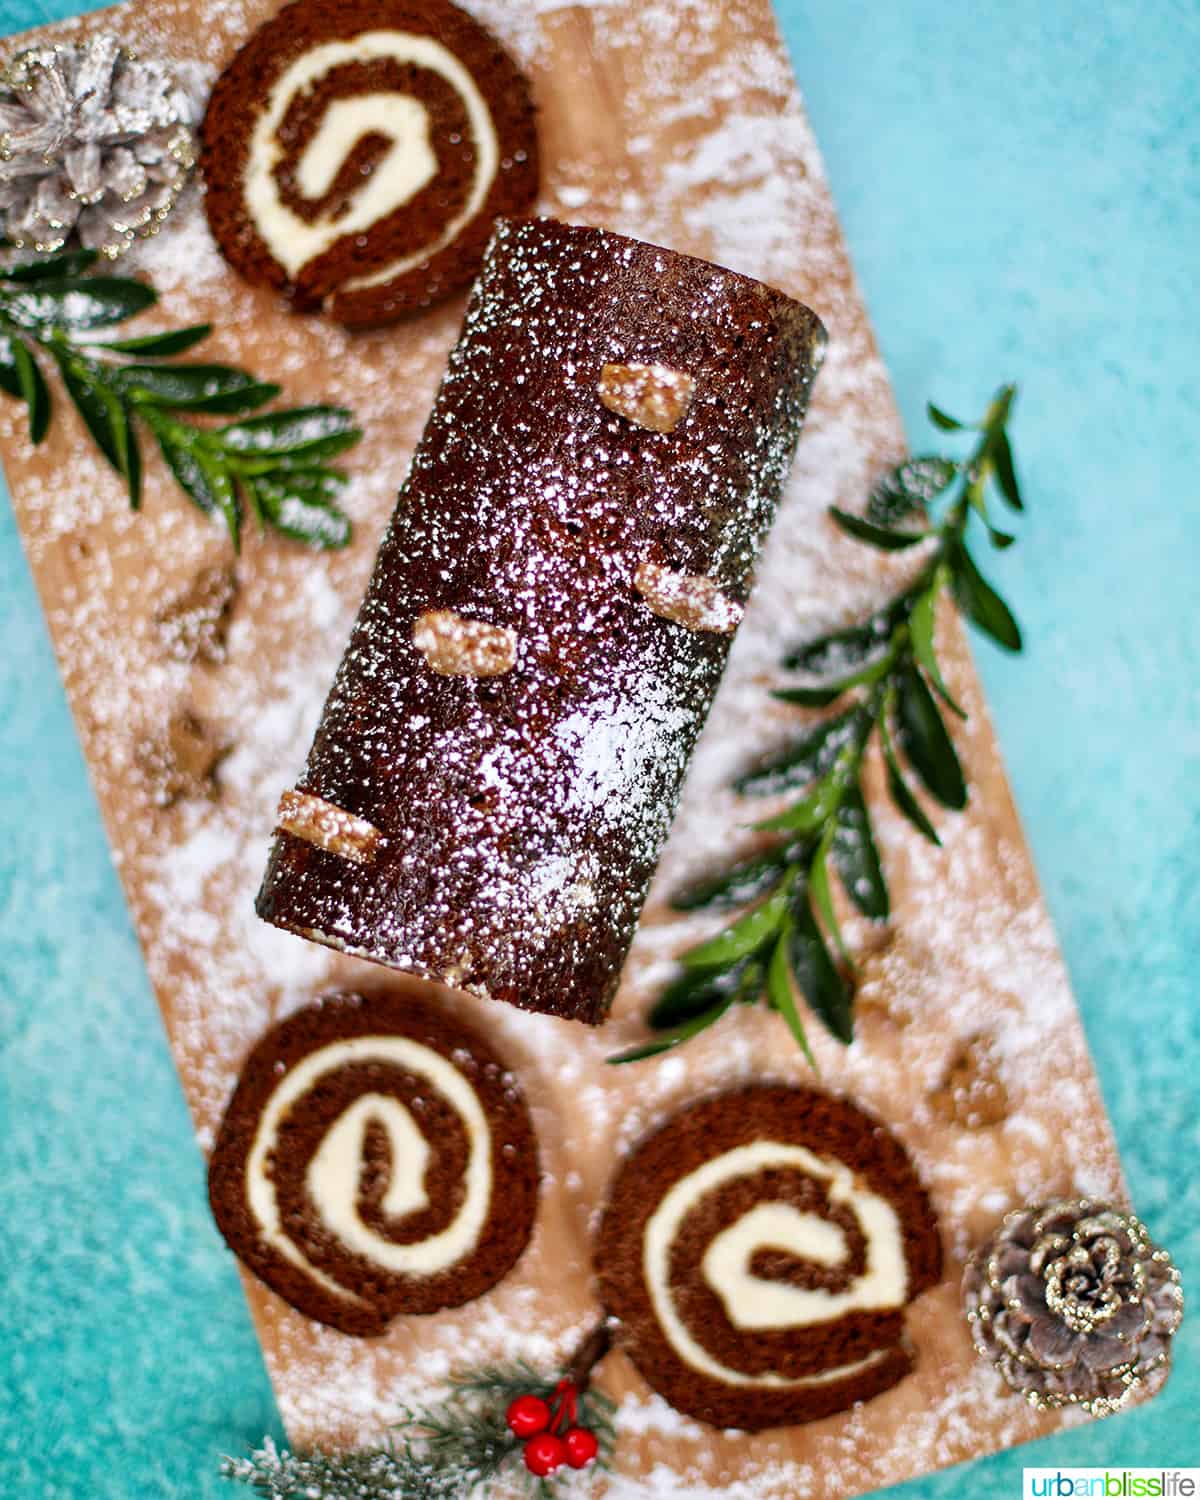 Gingerbread cake roll with holiday trimmings, cream cheese filling, and Christmas decorations.